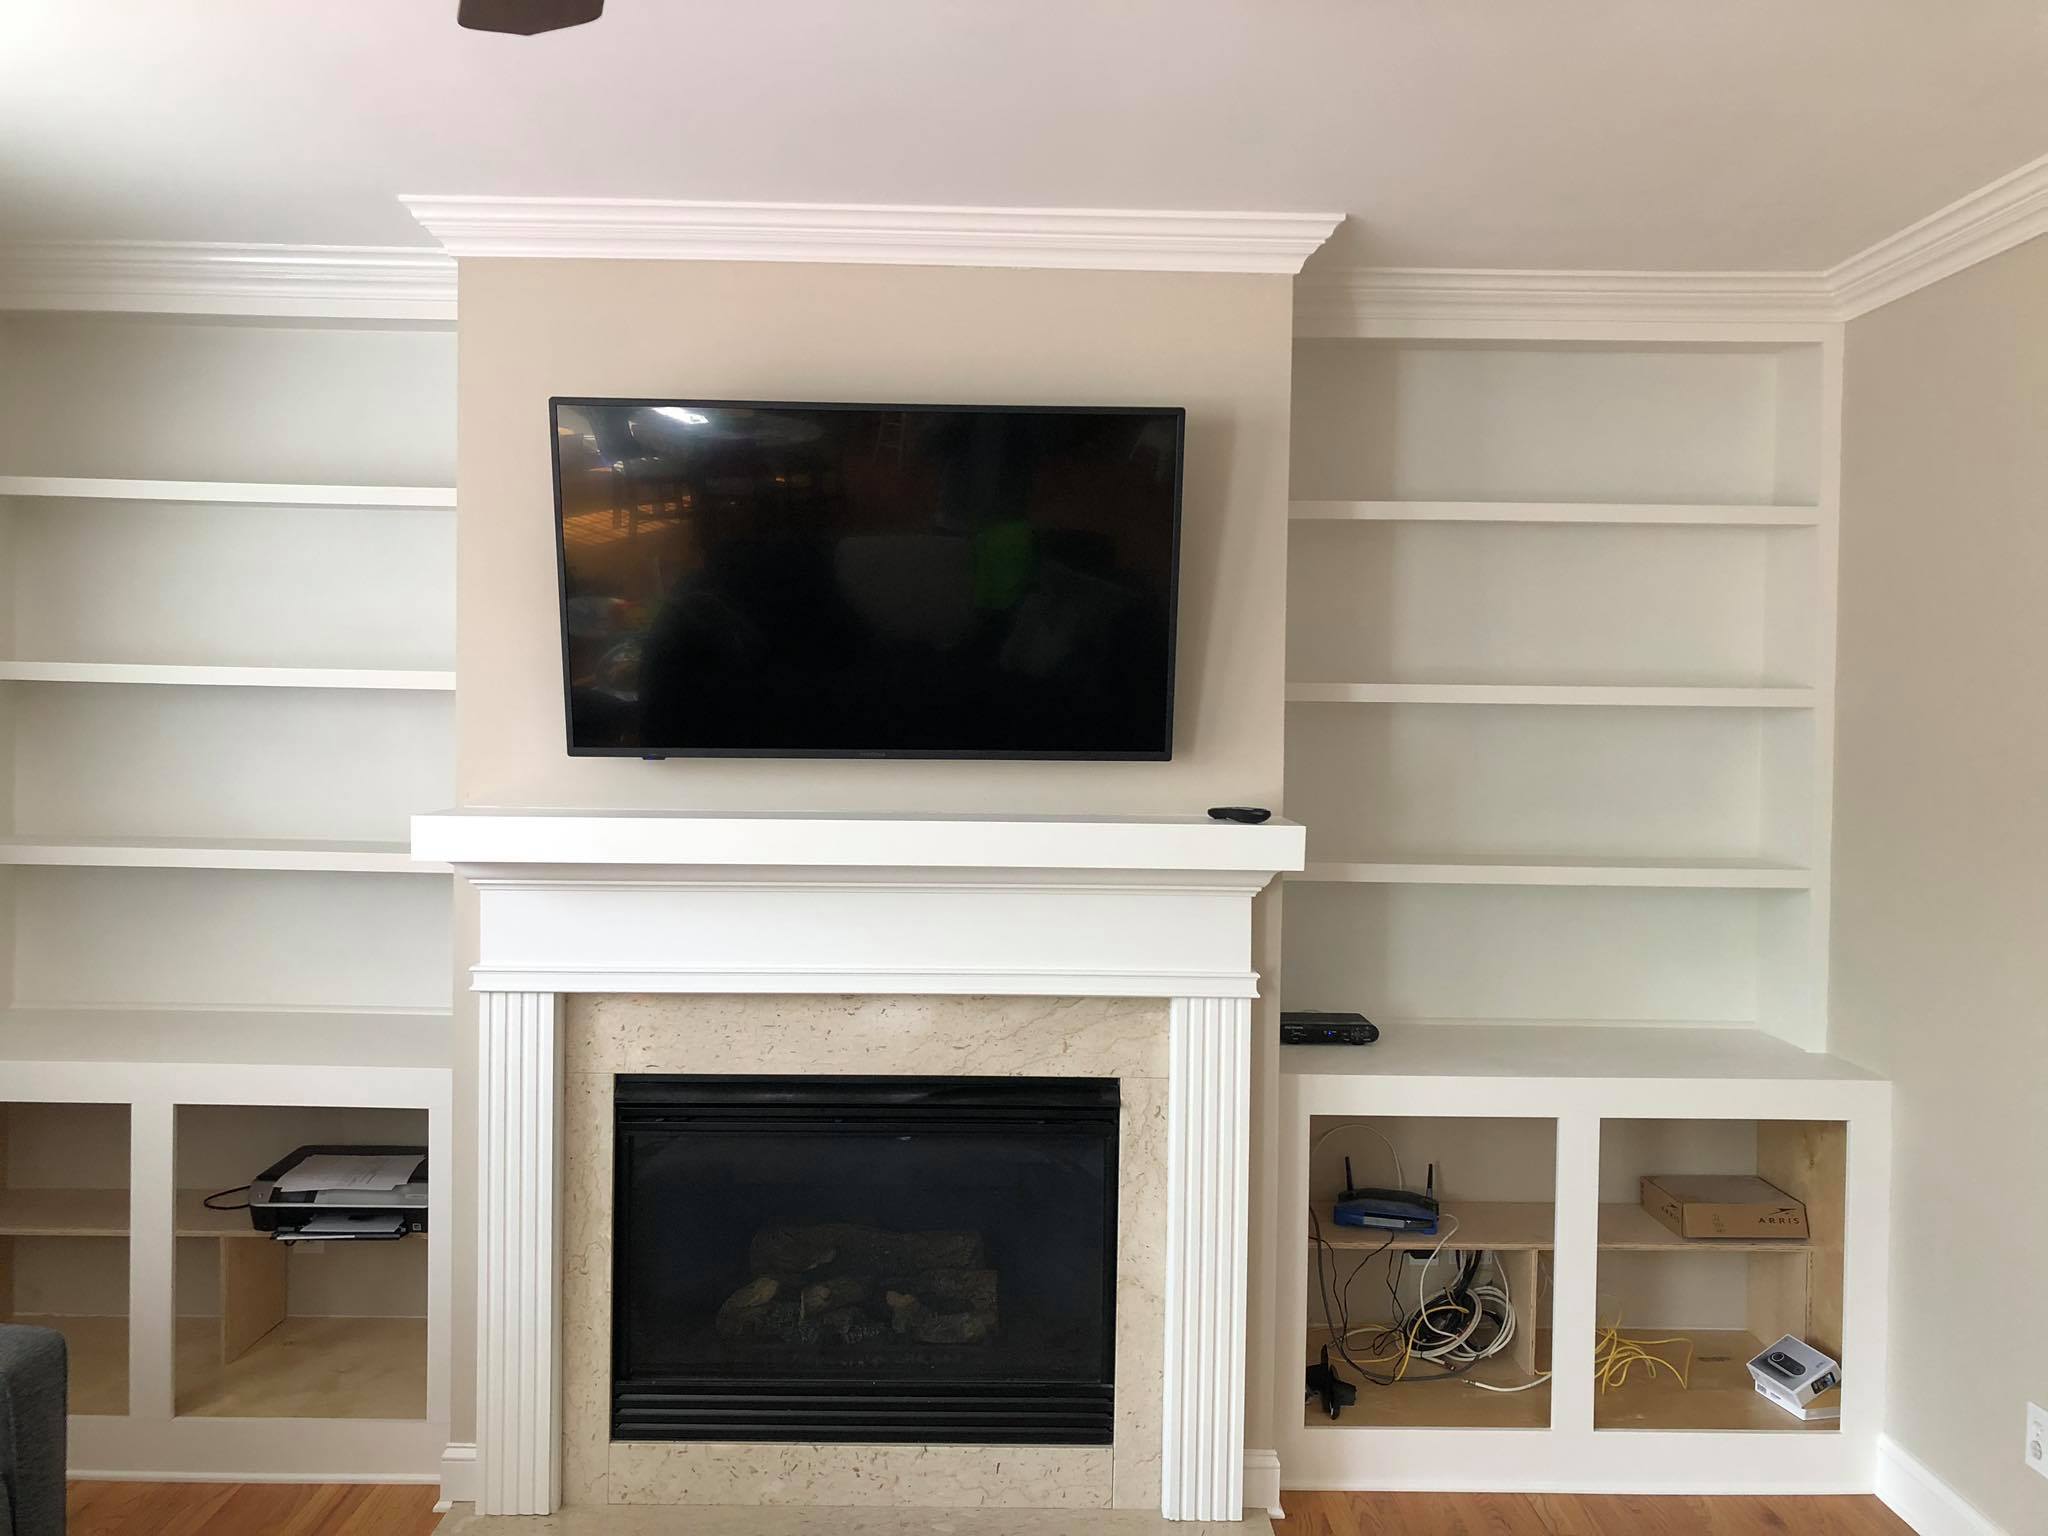 Fireplace Entertainment Center with Floating Shelves and Double Door Cabinets Front View